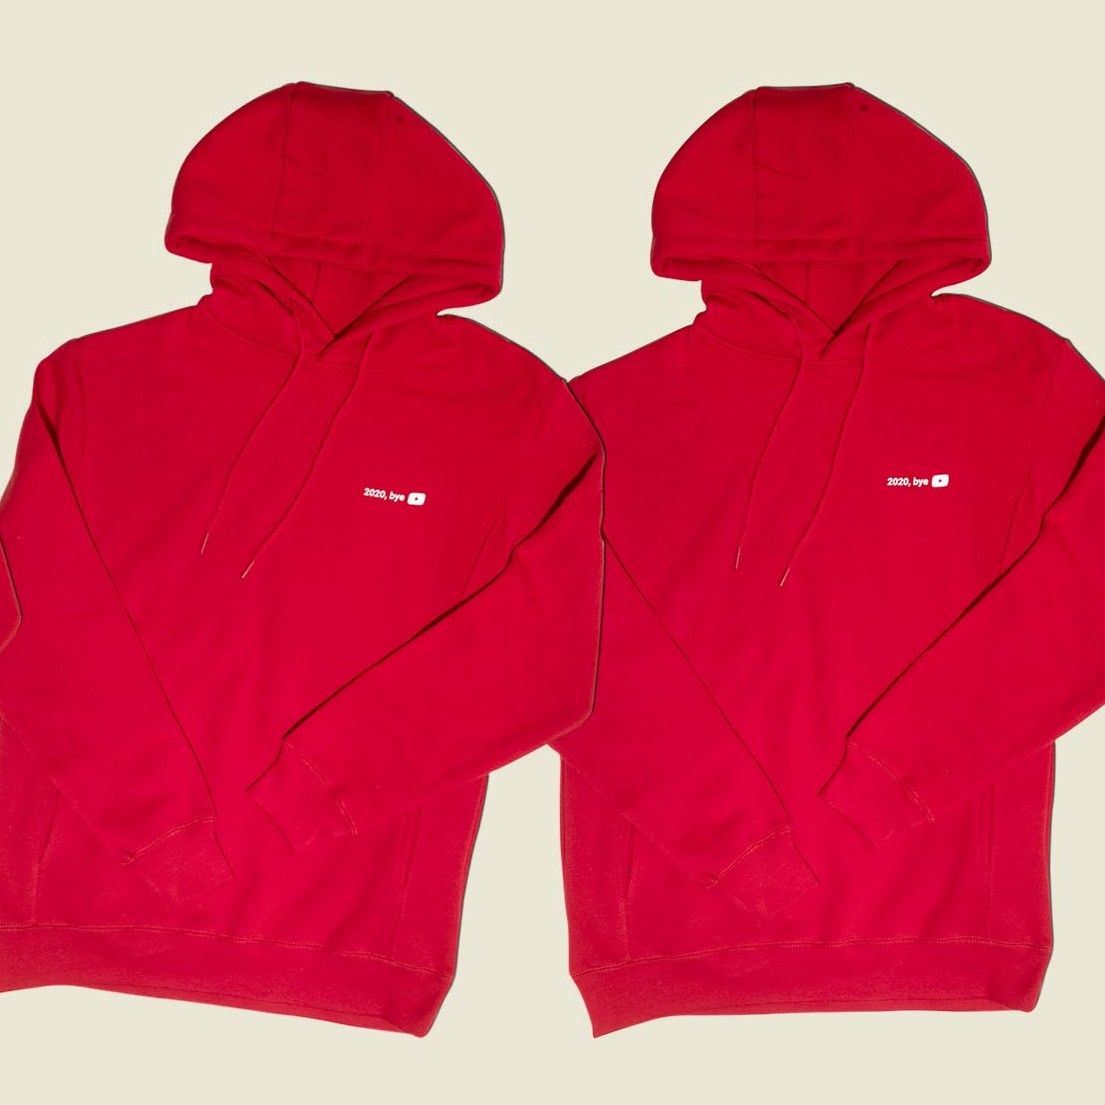 Set of red pullovers 